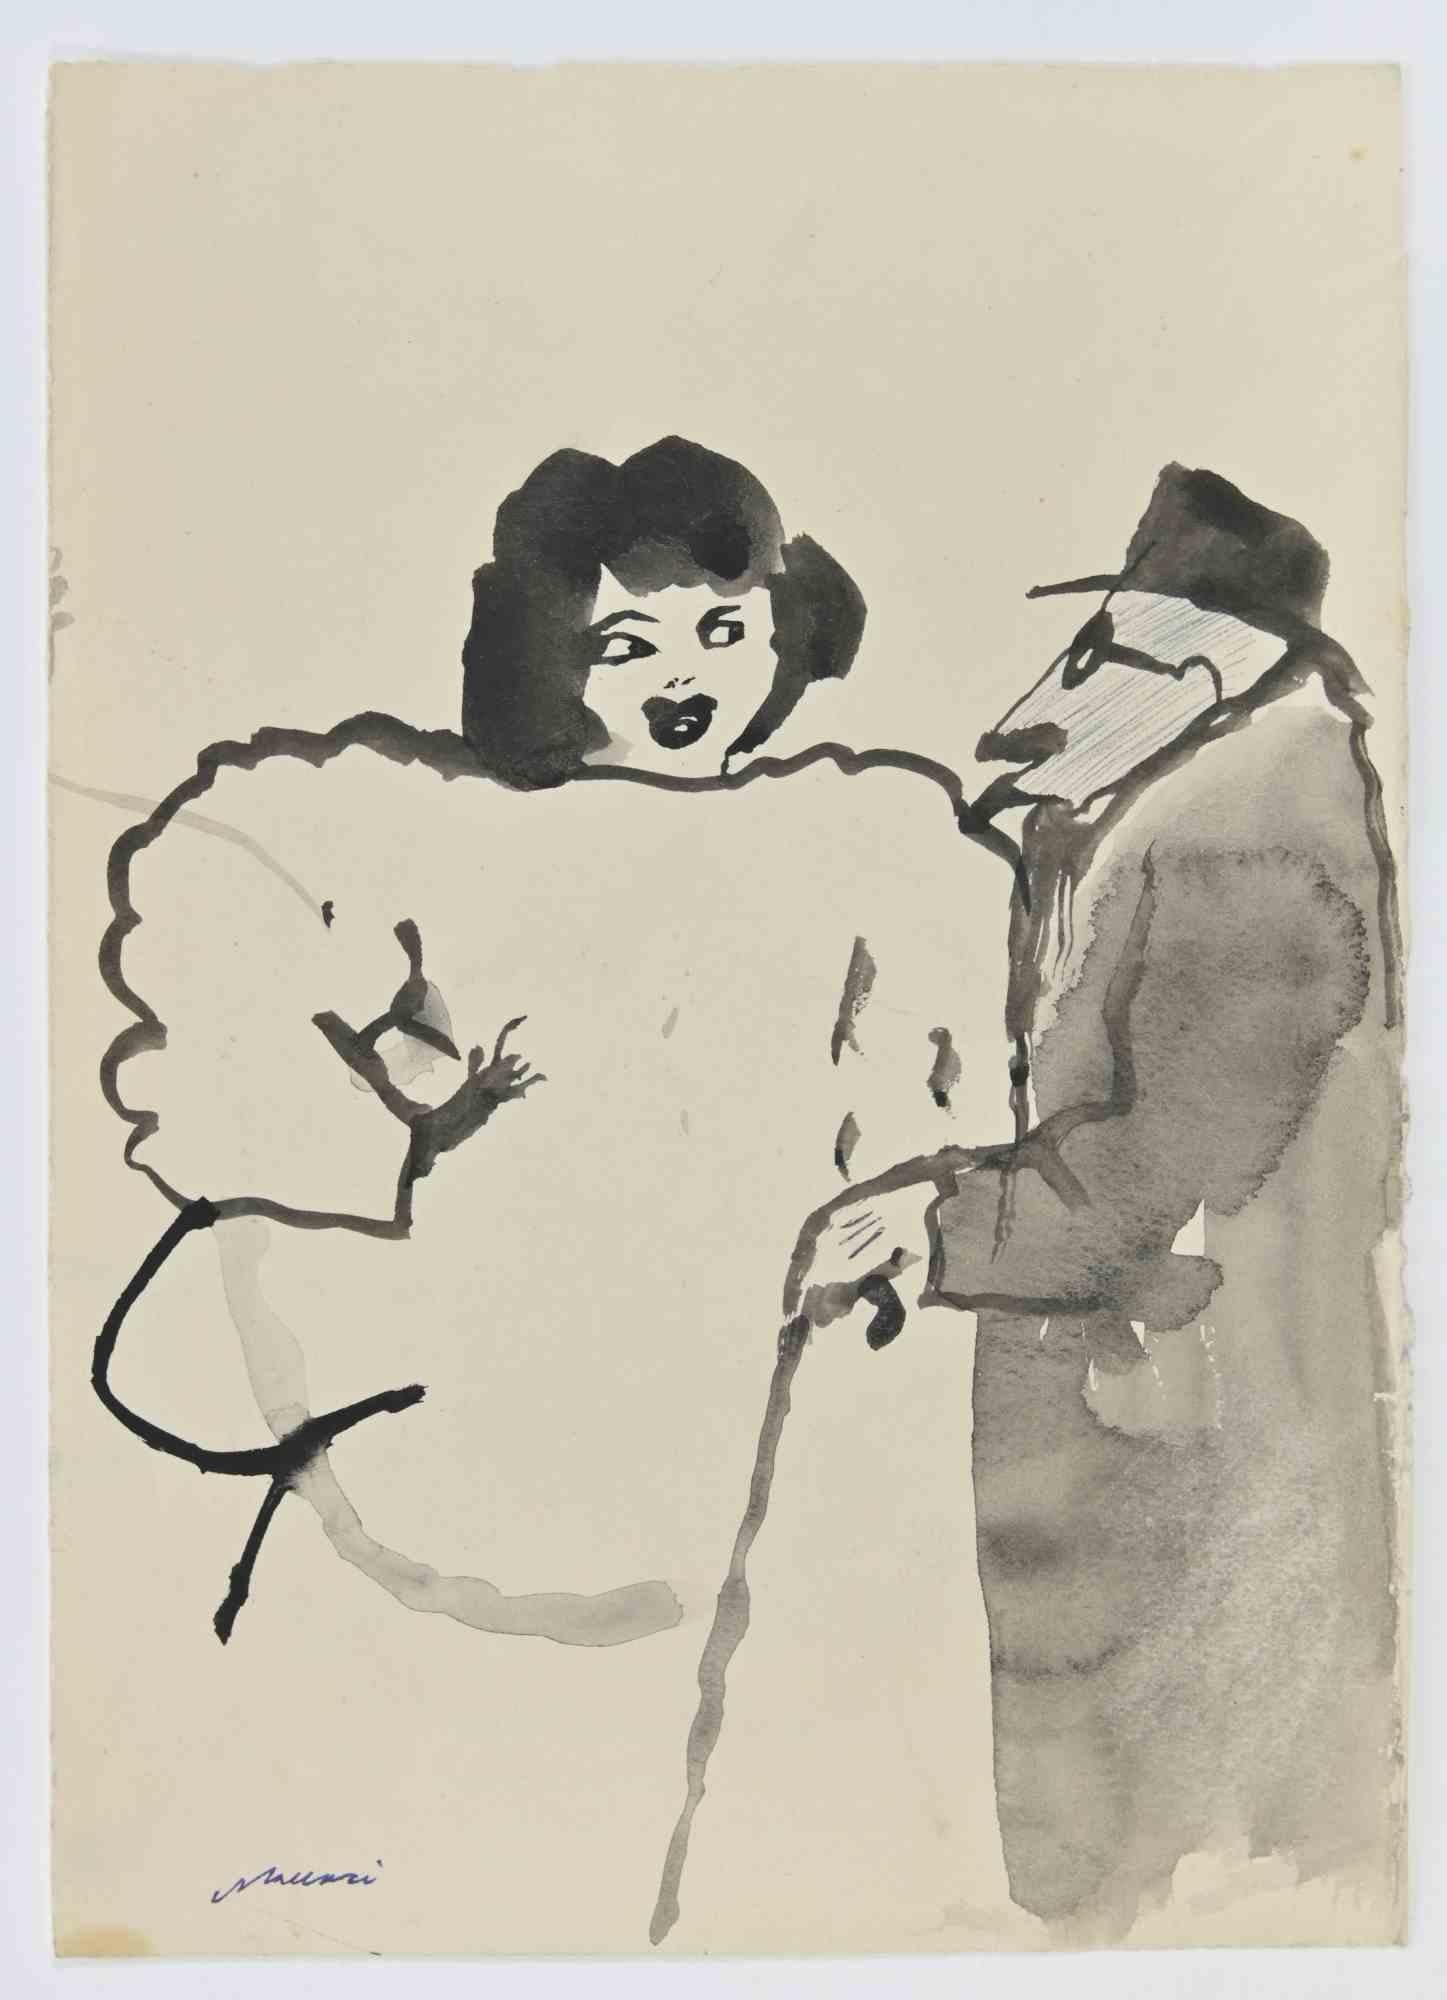 The Couple is a watercolor Drawing realized by Mino Maccari  (1924-1989) in 1960s.

Hand-signed on the lower margin.

Good condition.

Mino Maccari (Siena, 1924-Rome, June 16, 1989) was an Italian writer, painter, engraver and journalist, winner of